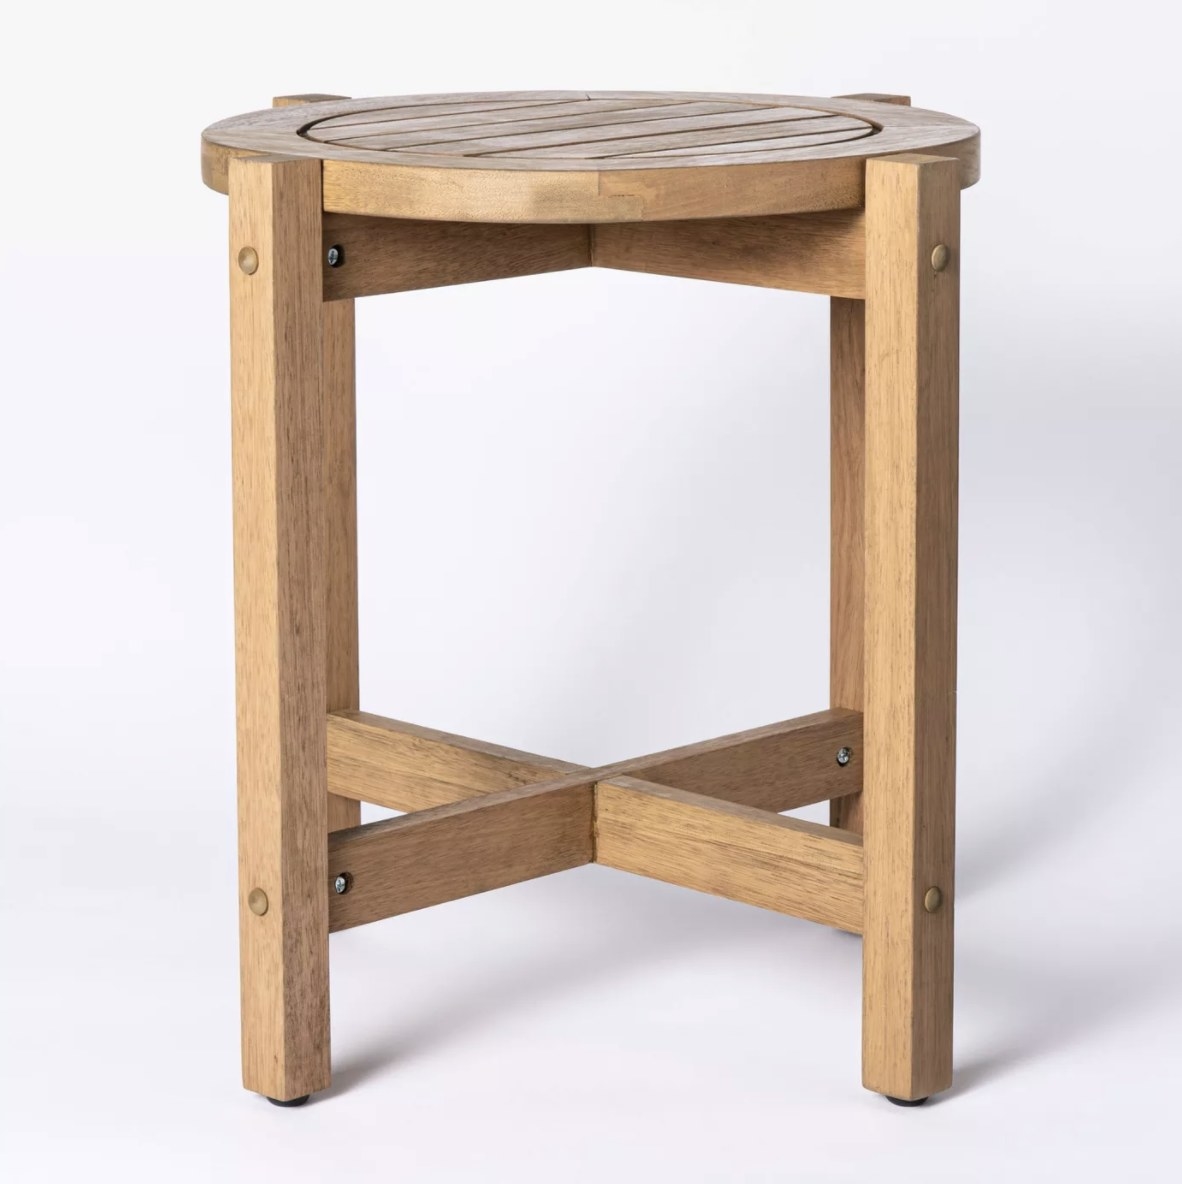 The wooden table has an X-frame at the bottom and a slatted circular top